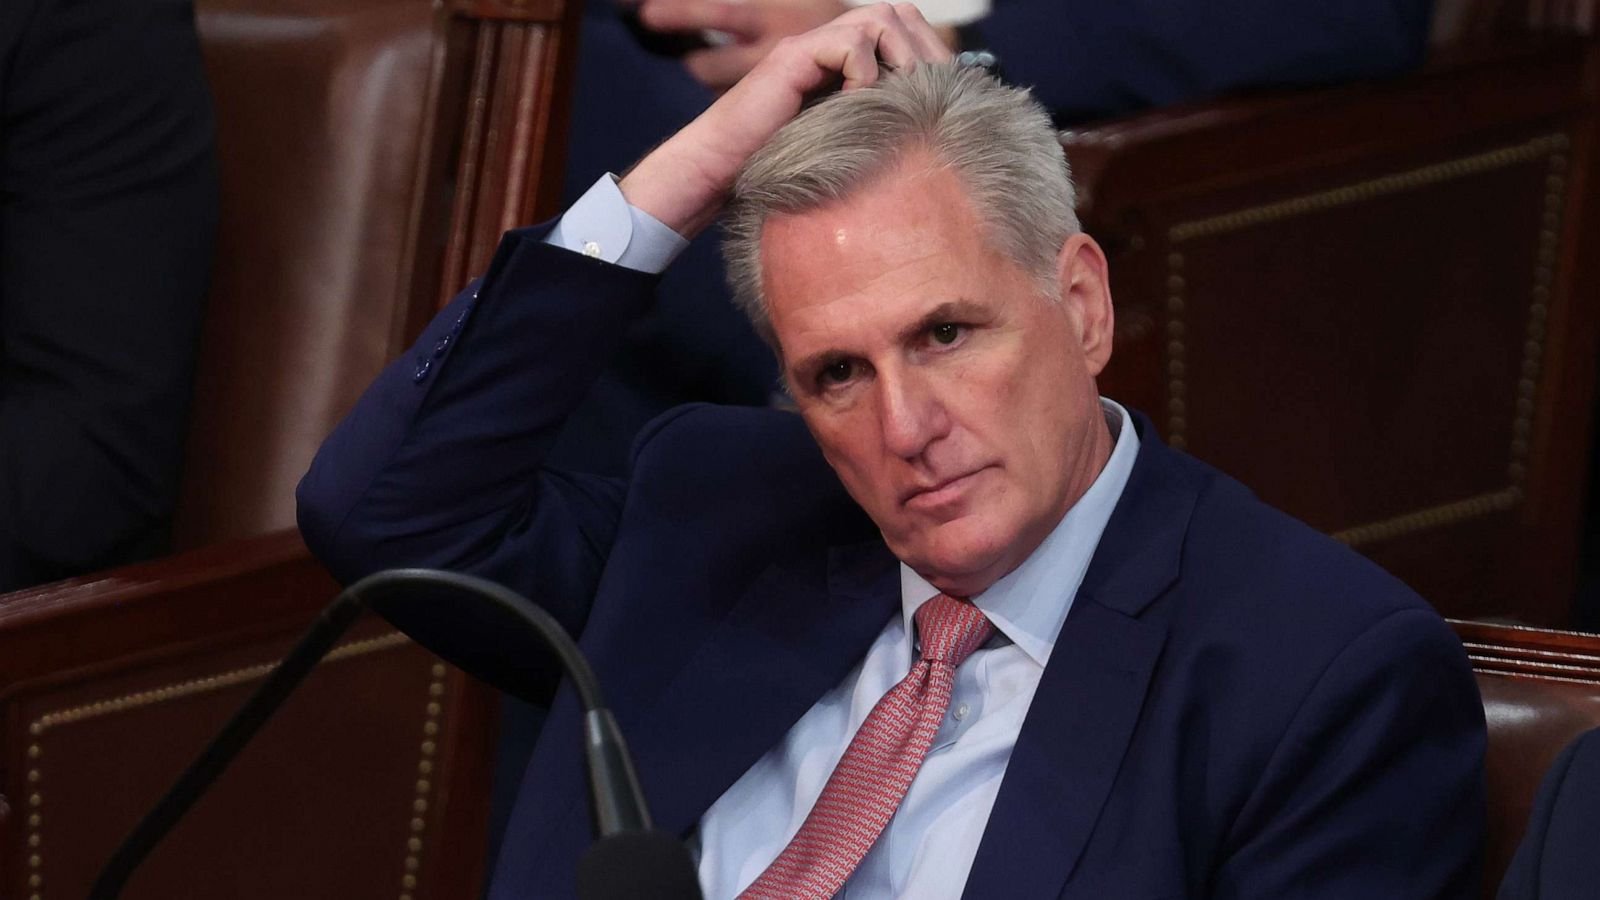 Kevin McCarthy elected as House speaker, ending four-day leadership standoff